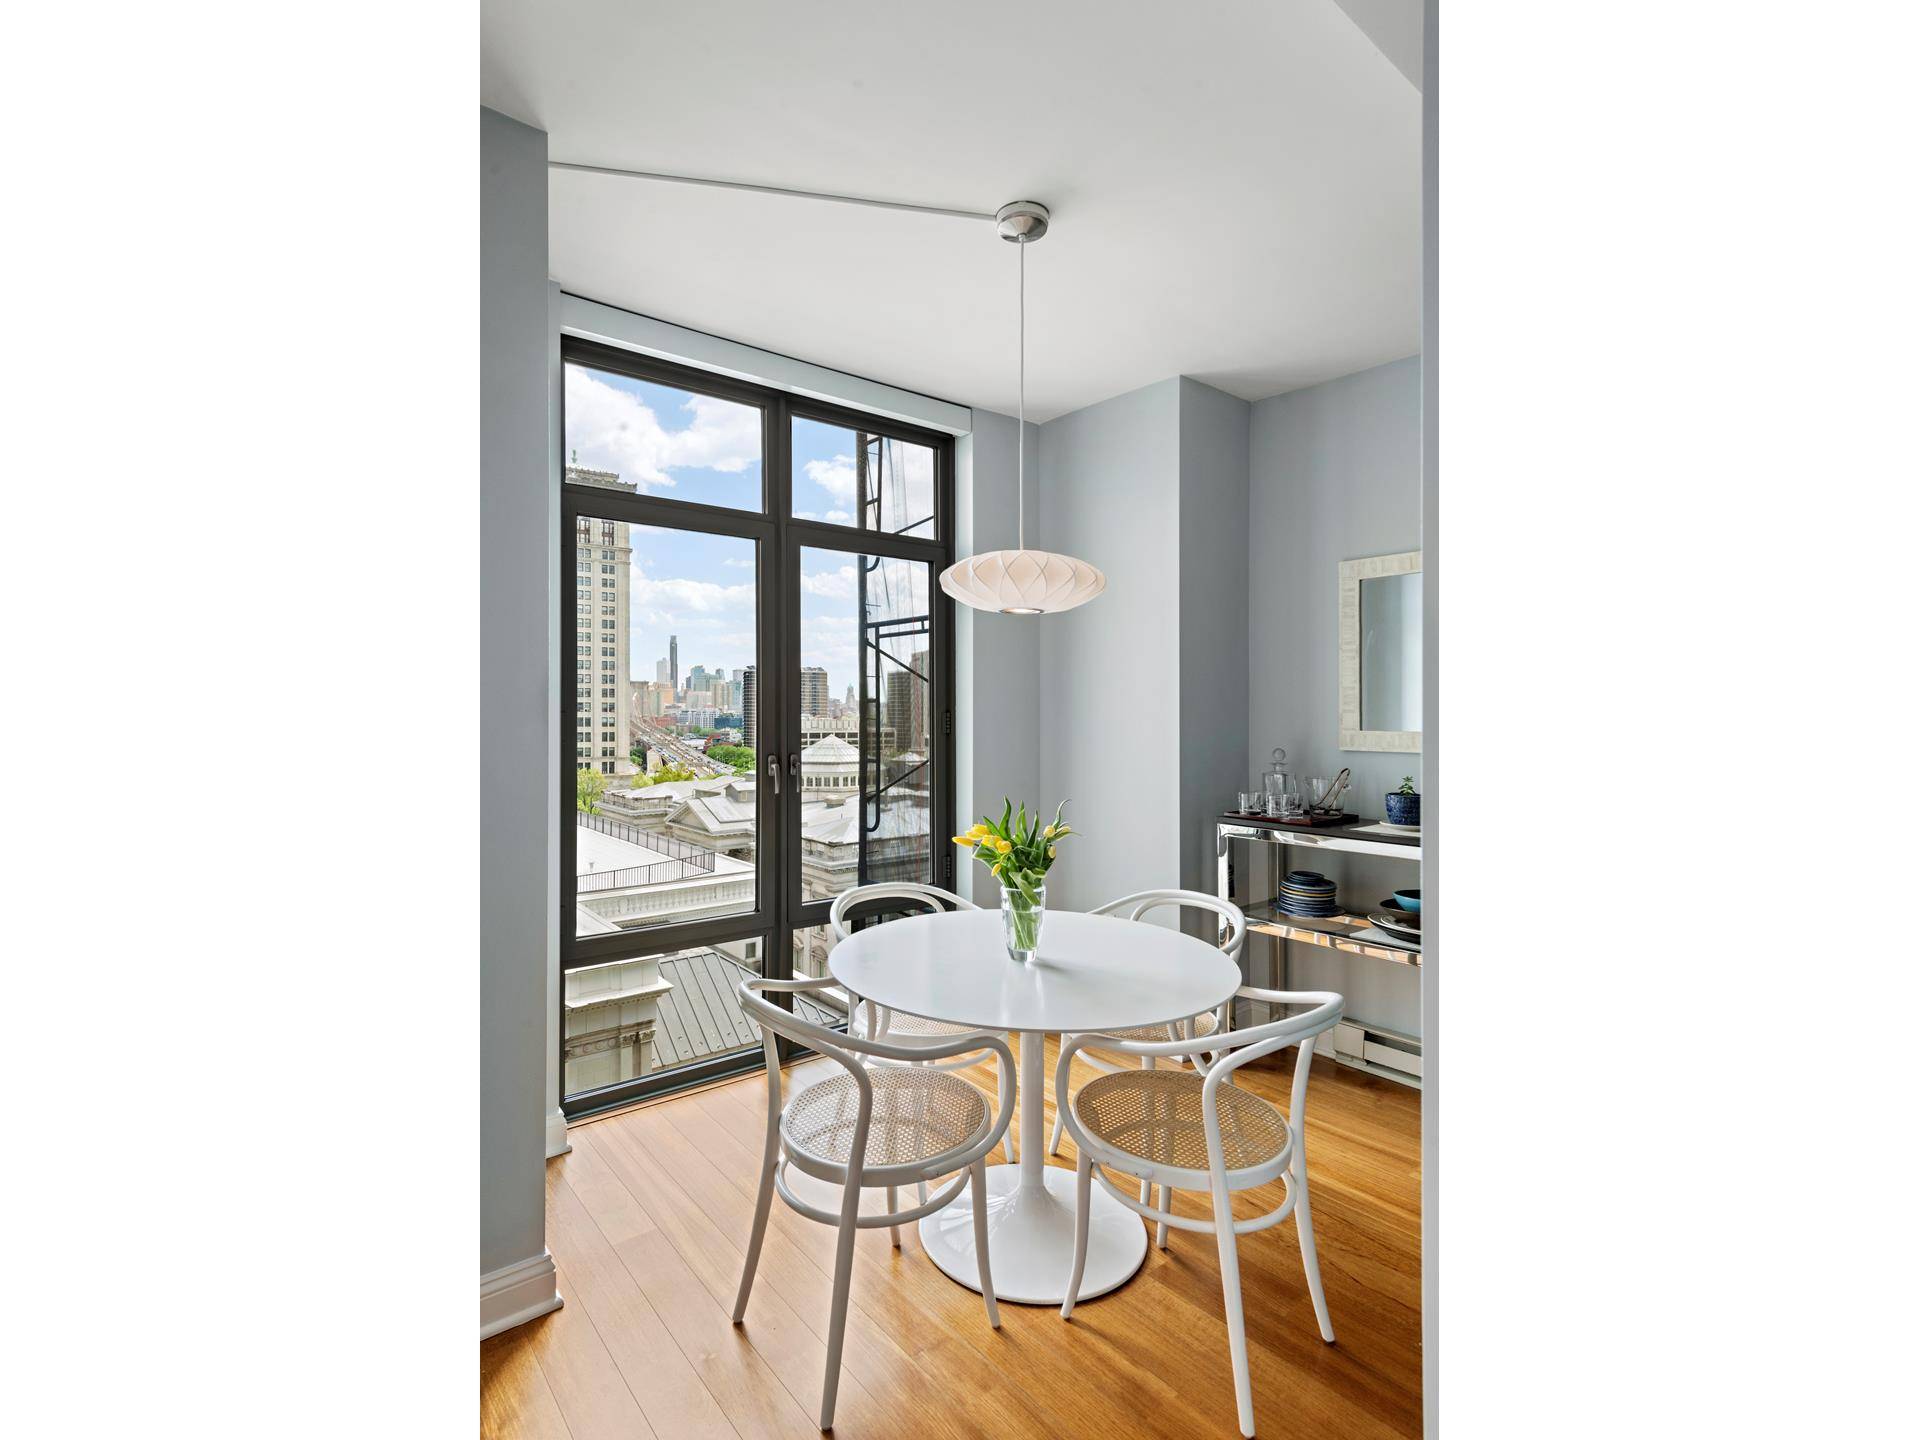 Welcome to this rare opportunity to reside in this spacious, light filled one bedroom with a terrace in the heart of TriBeCa at 57 Reade.